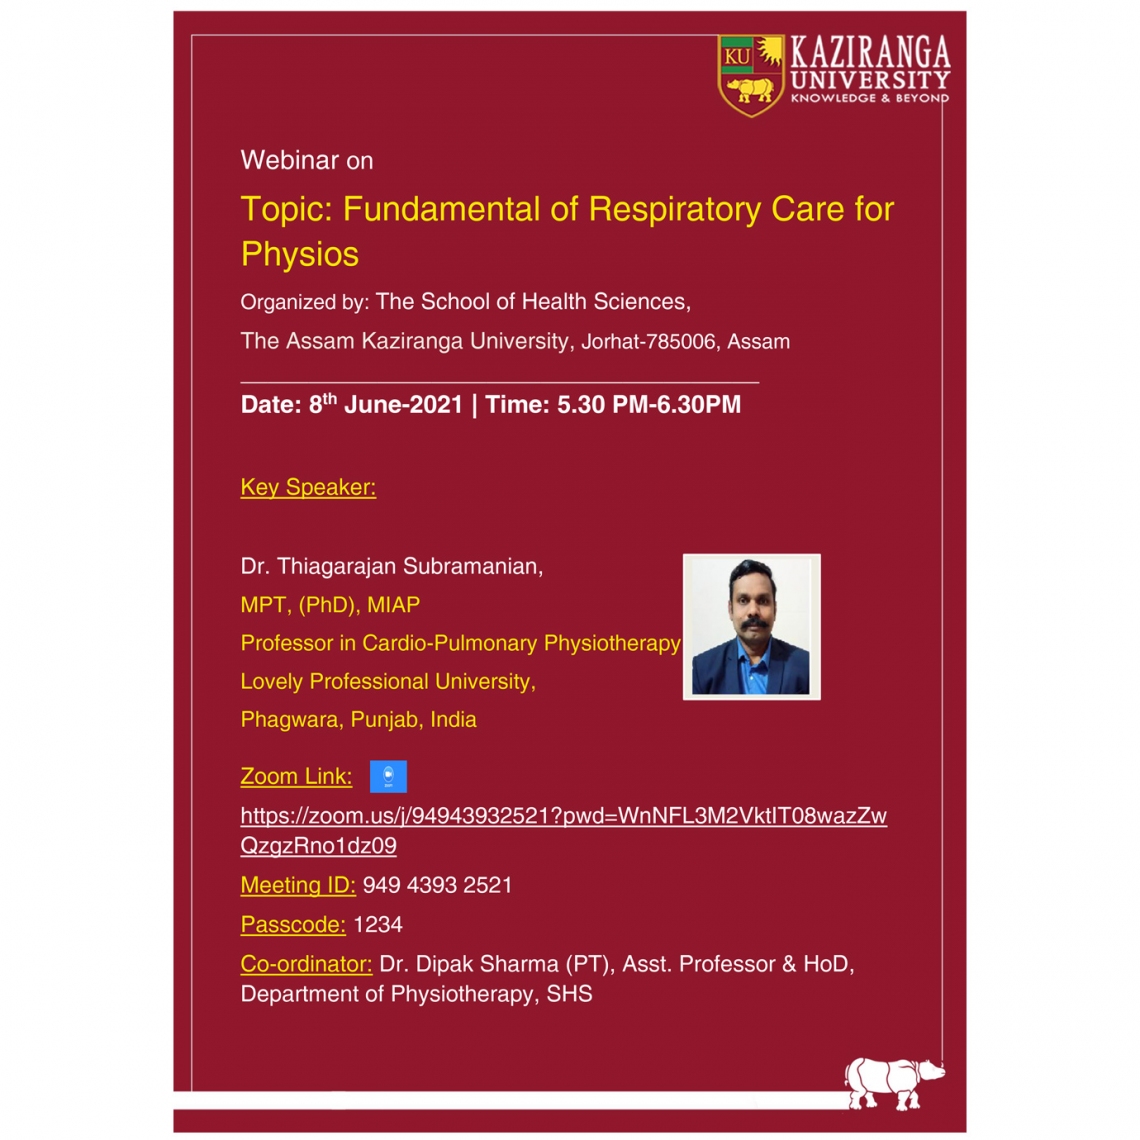 Webinar on Fundamental of Respiratory Care for Physios